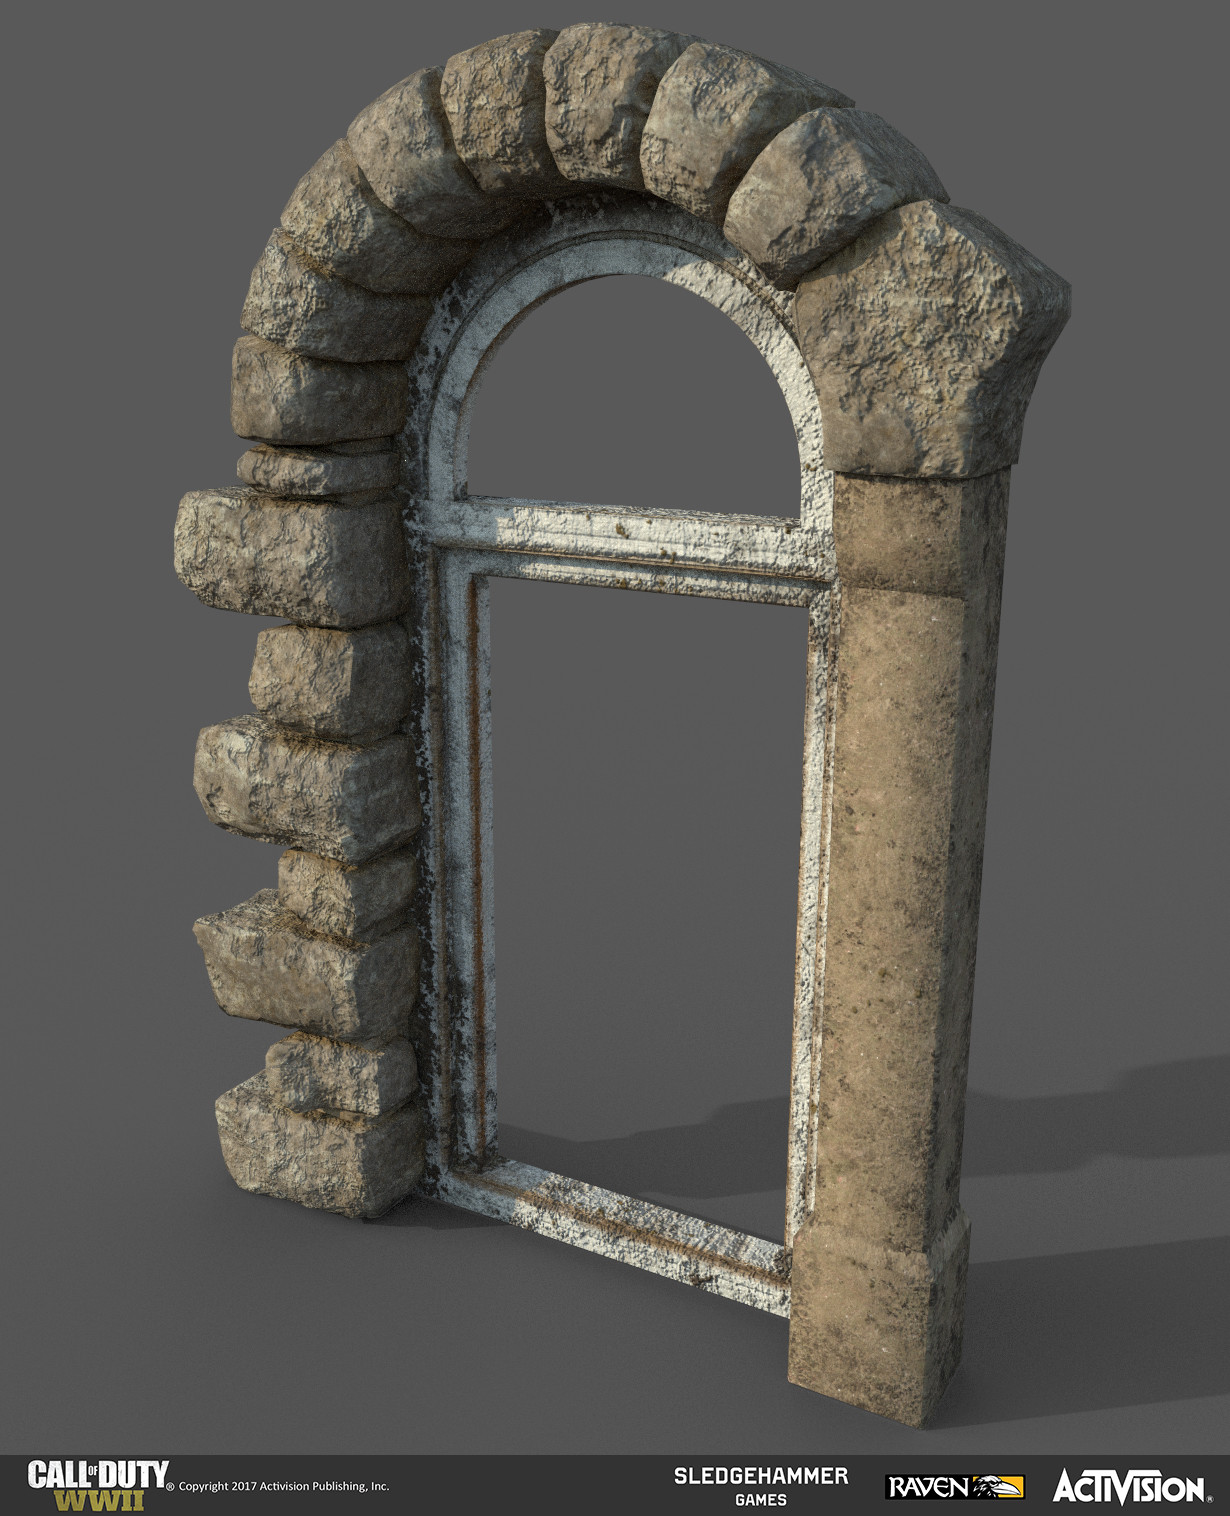 This is one of the modular window models I made for the train station. I created it in 3DSMax and I created the materials for it (along with a burnt variation) in Substance Painter. This image was rendered in Substance Painter.